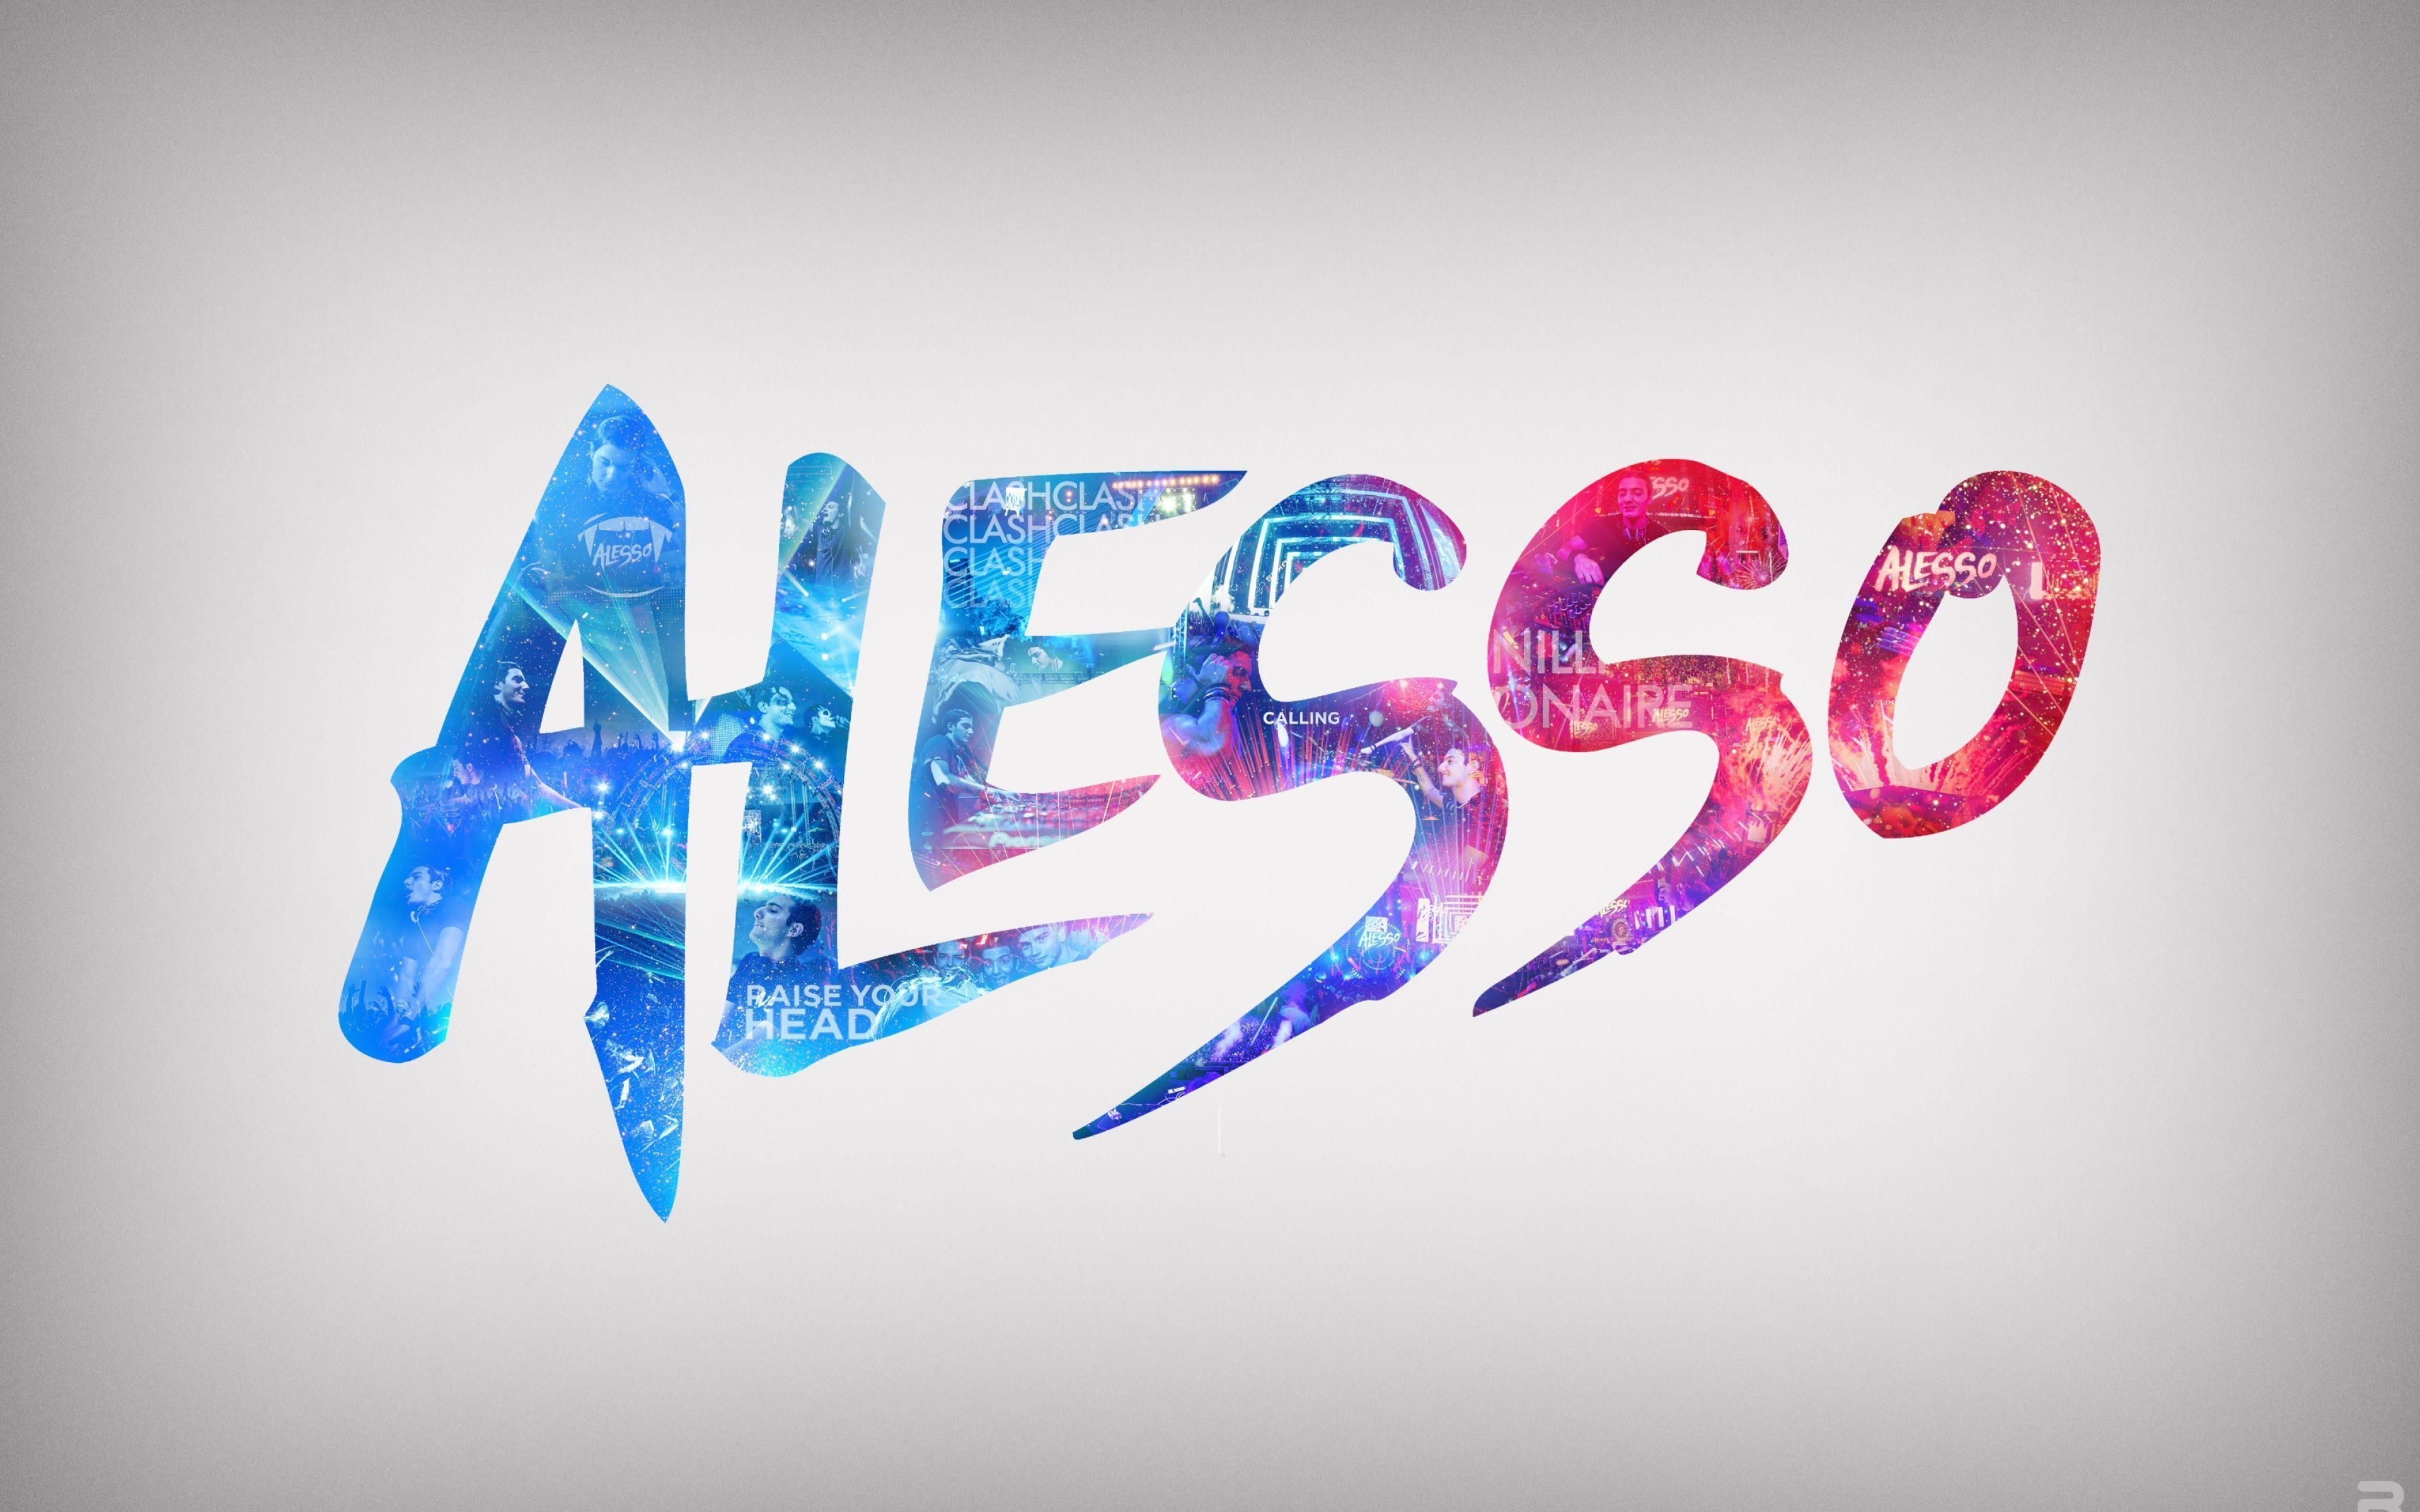 Alesso Wallpaper and Top Mix. Edm, Dj, Heroes we could be